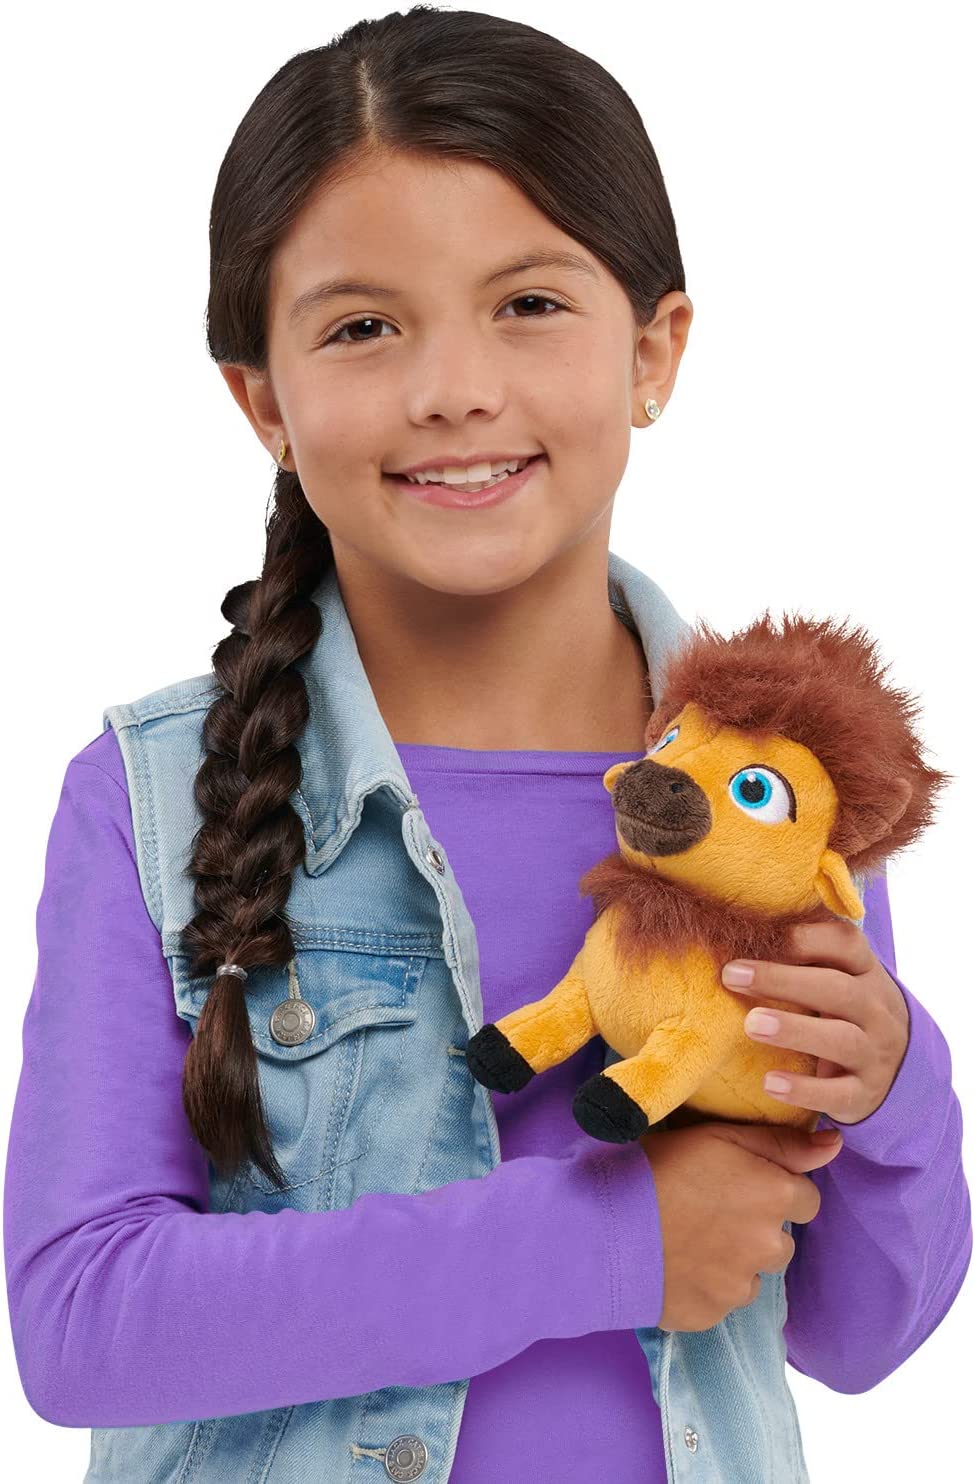 8" Just Play Netflix Ridley Jones Kids' Collectible Plush (Fred the Bison) $3.34 + Free Shipping w/ Prime or on $25+